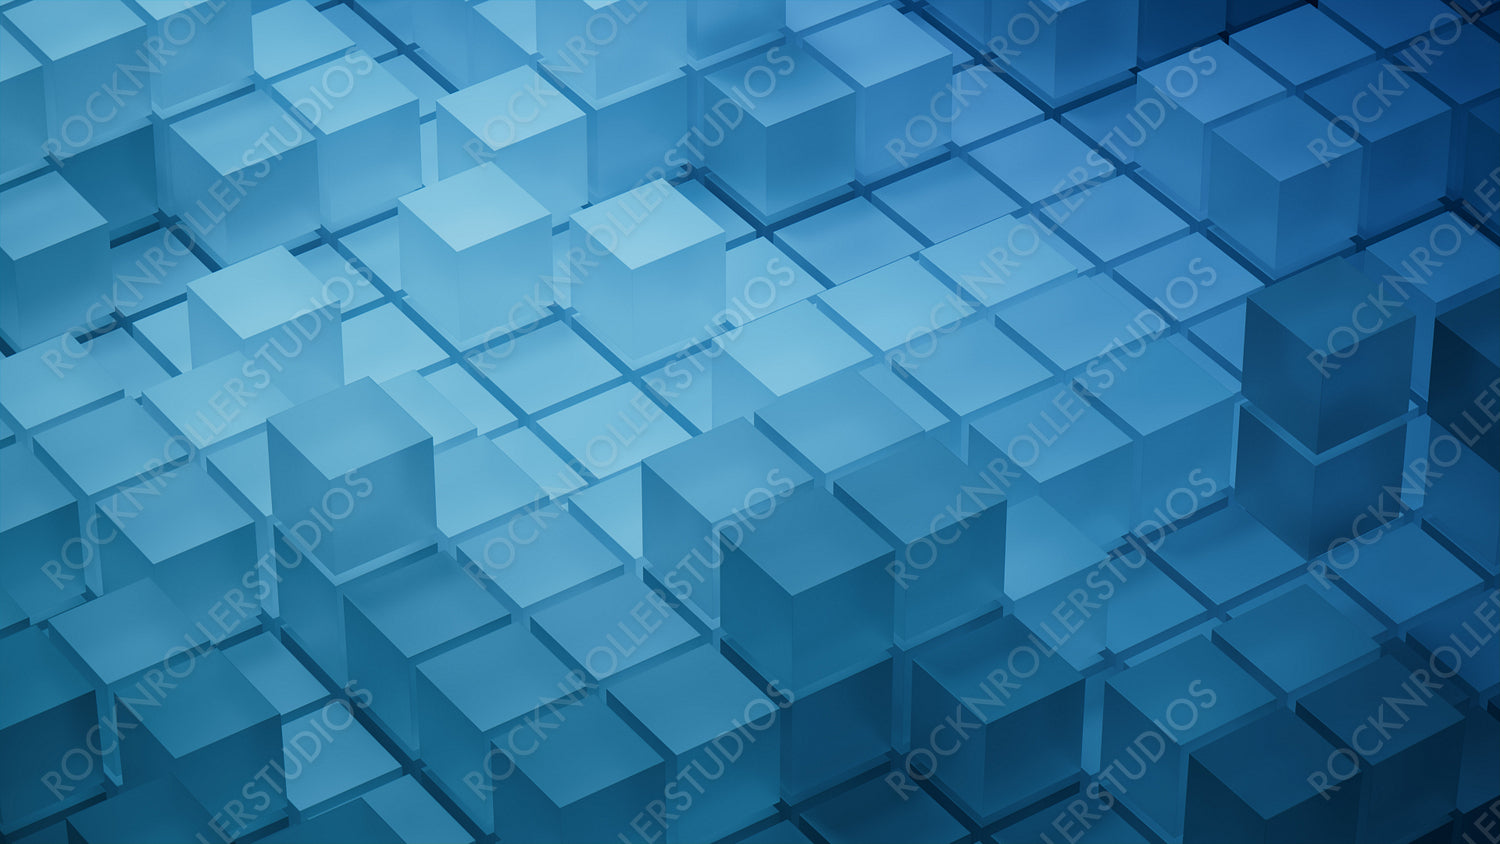 Blue, Translucent Cubes Perfectly Aligned to create a Futuristic Tech Wallpaper. 3D Render.